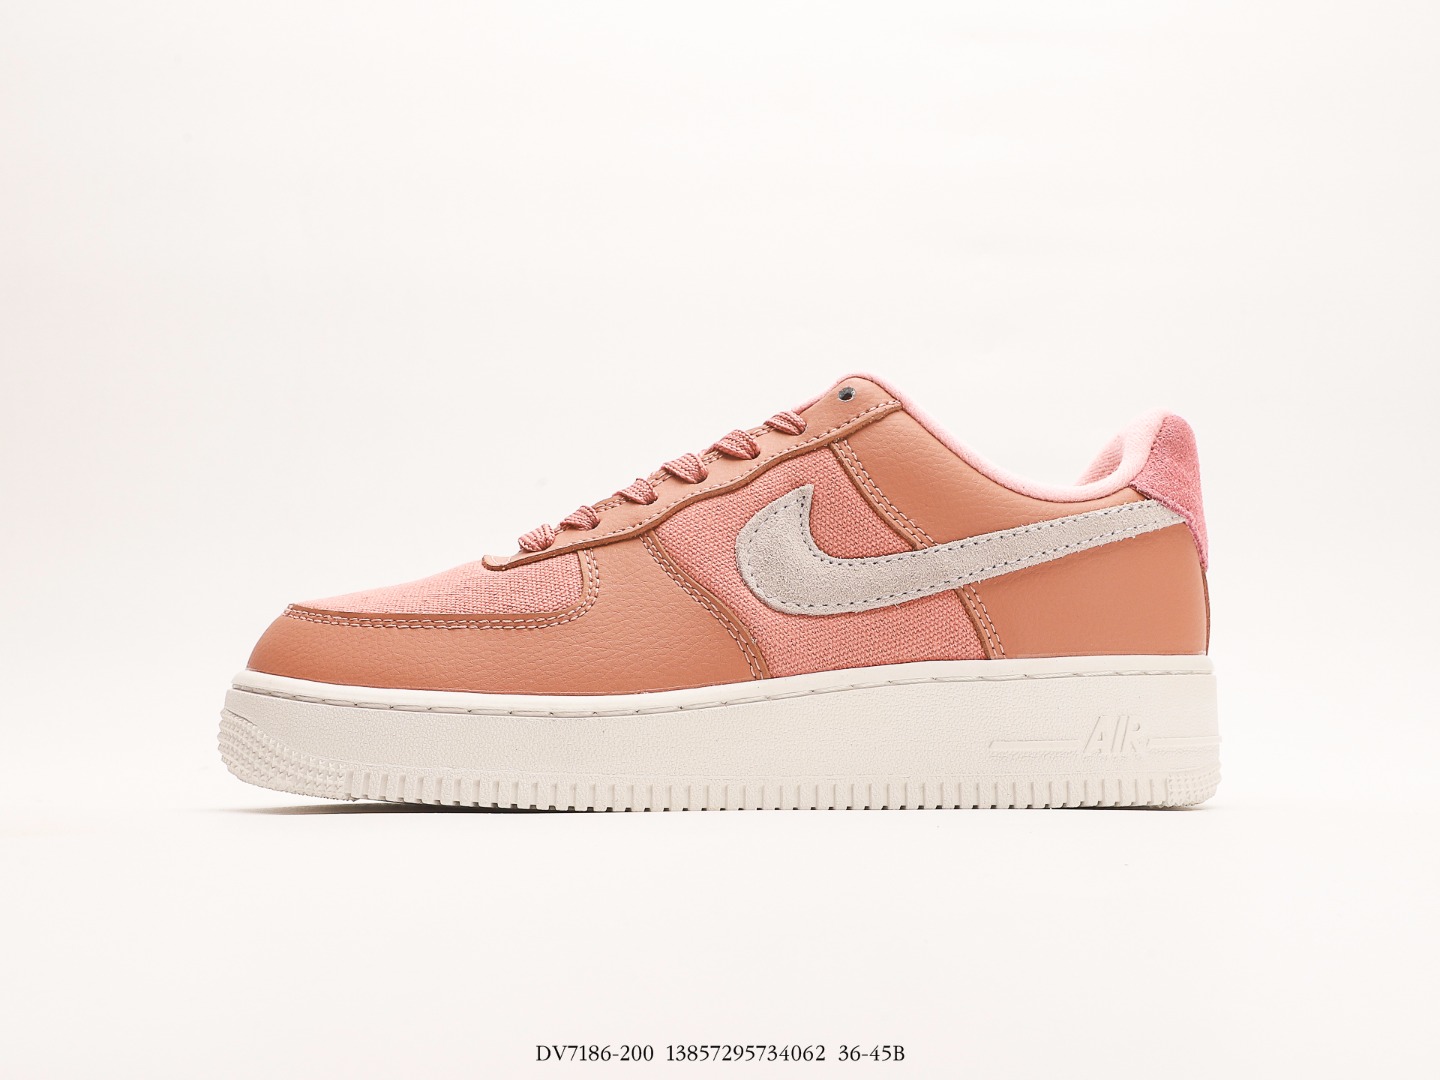 Nike Air Force 1 faible AF1 Force 1 _DV7186-200